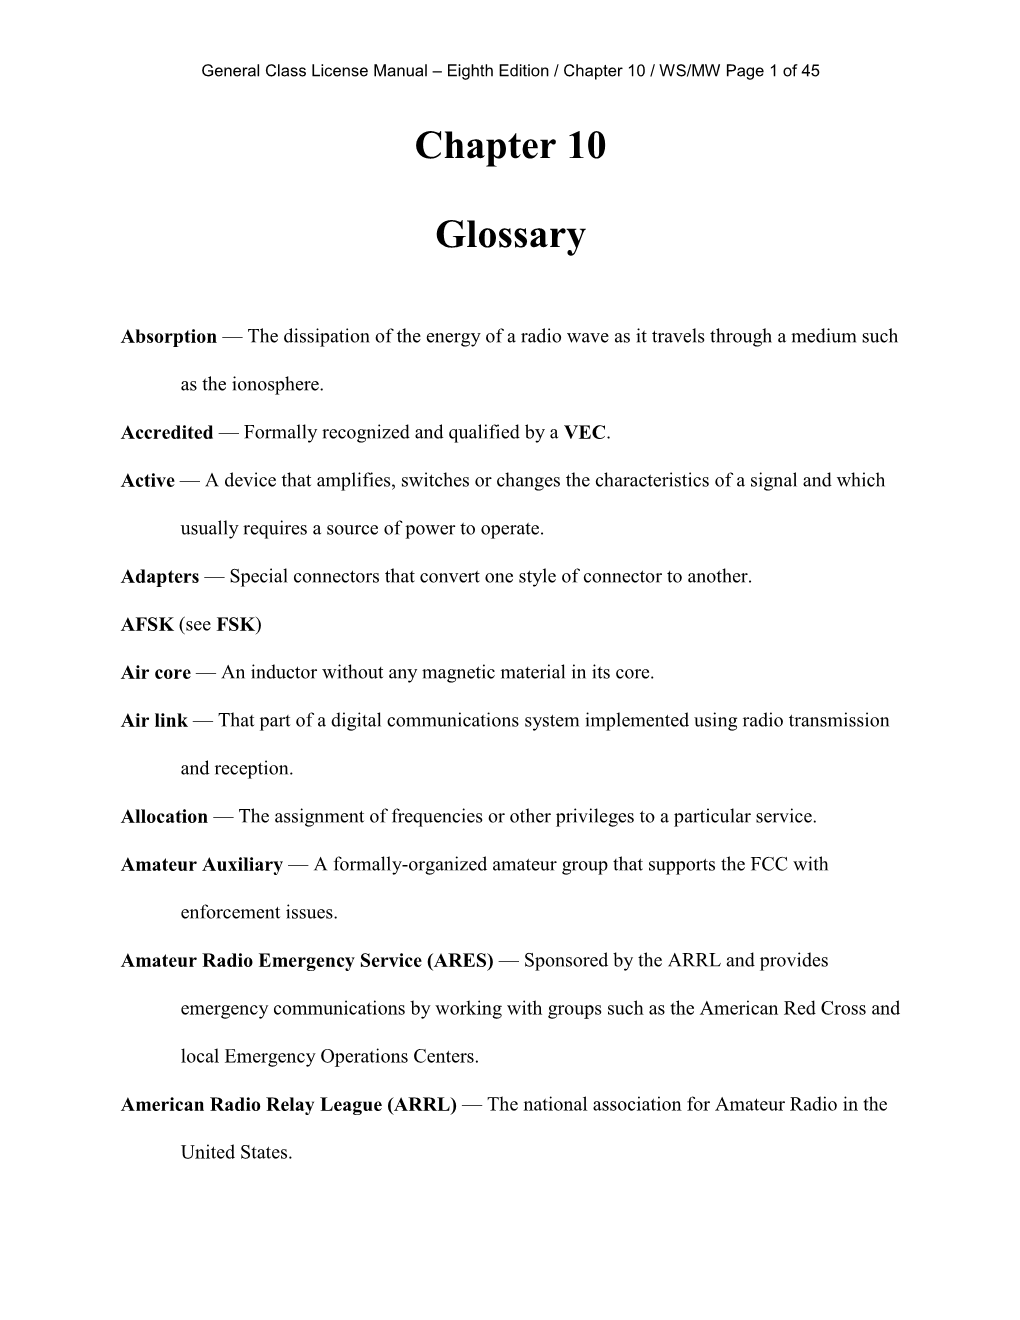 Chapter 10 Glossary